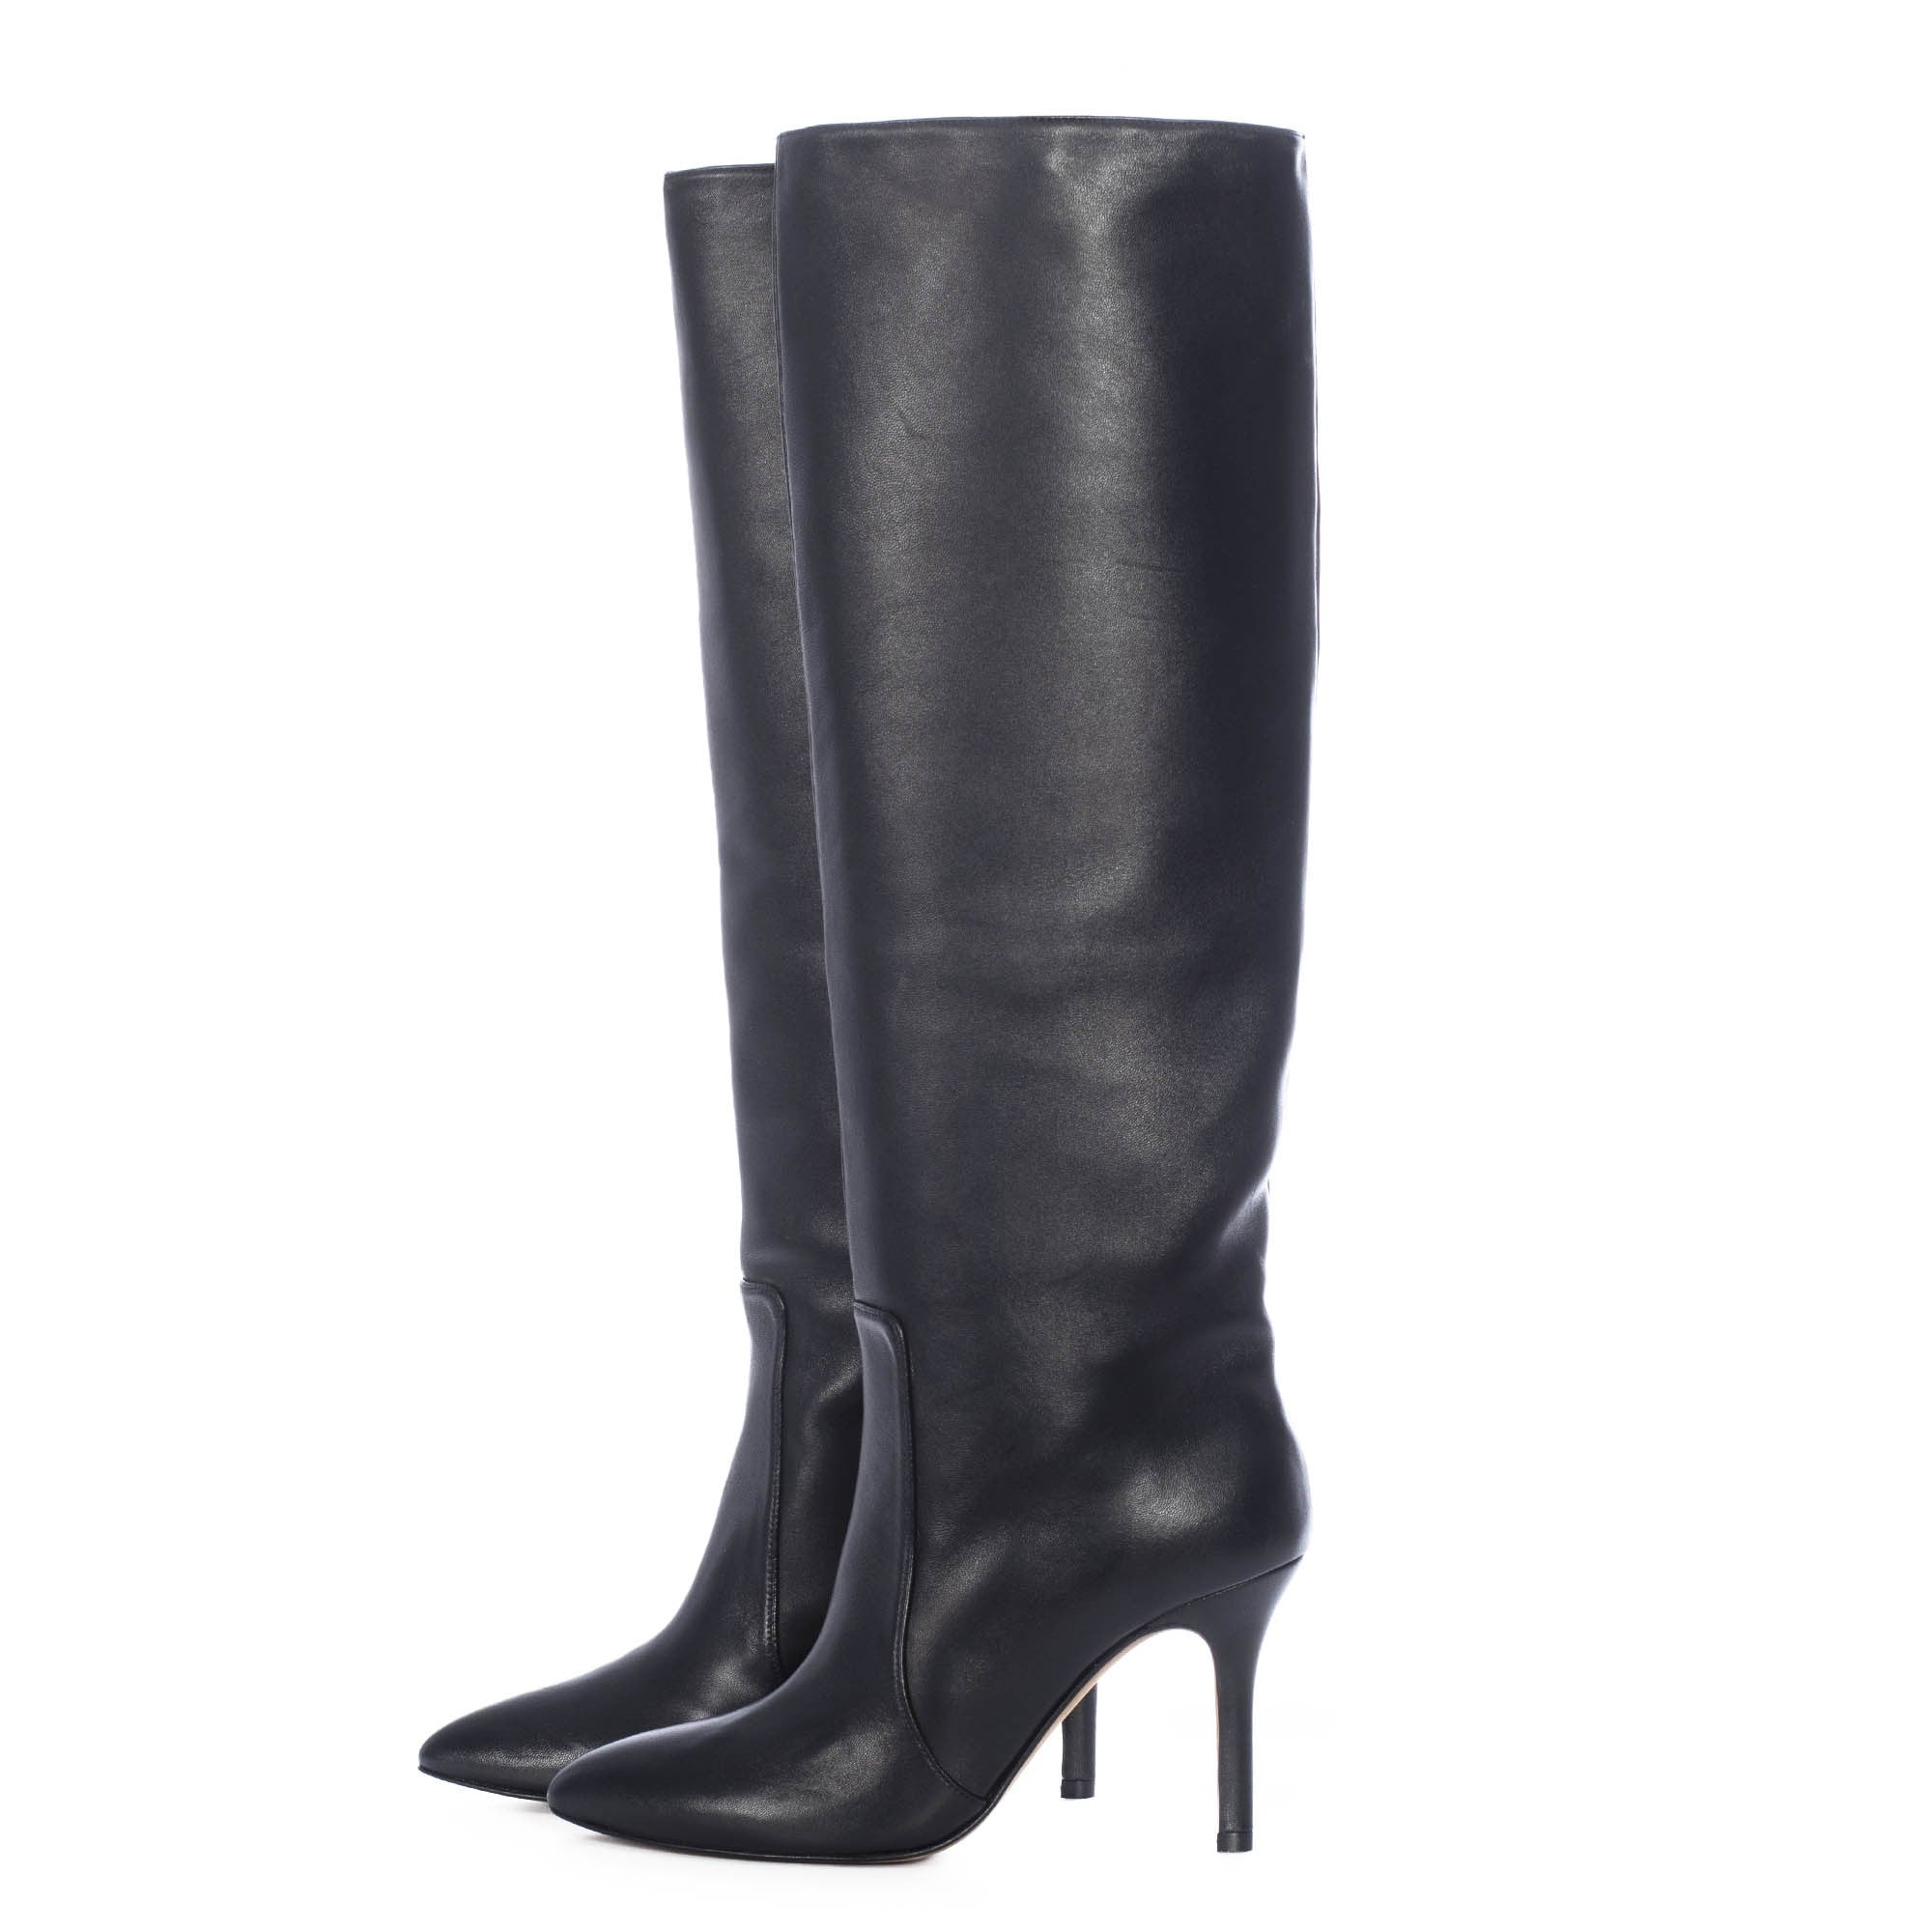 TORAL BLACK LEATHER KNEE-HIGH BOOTS (6947996336268)